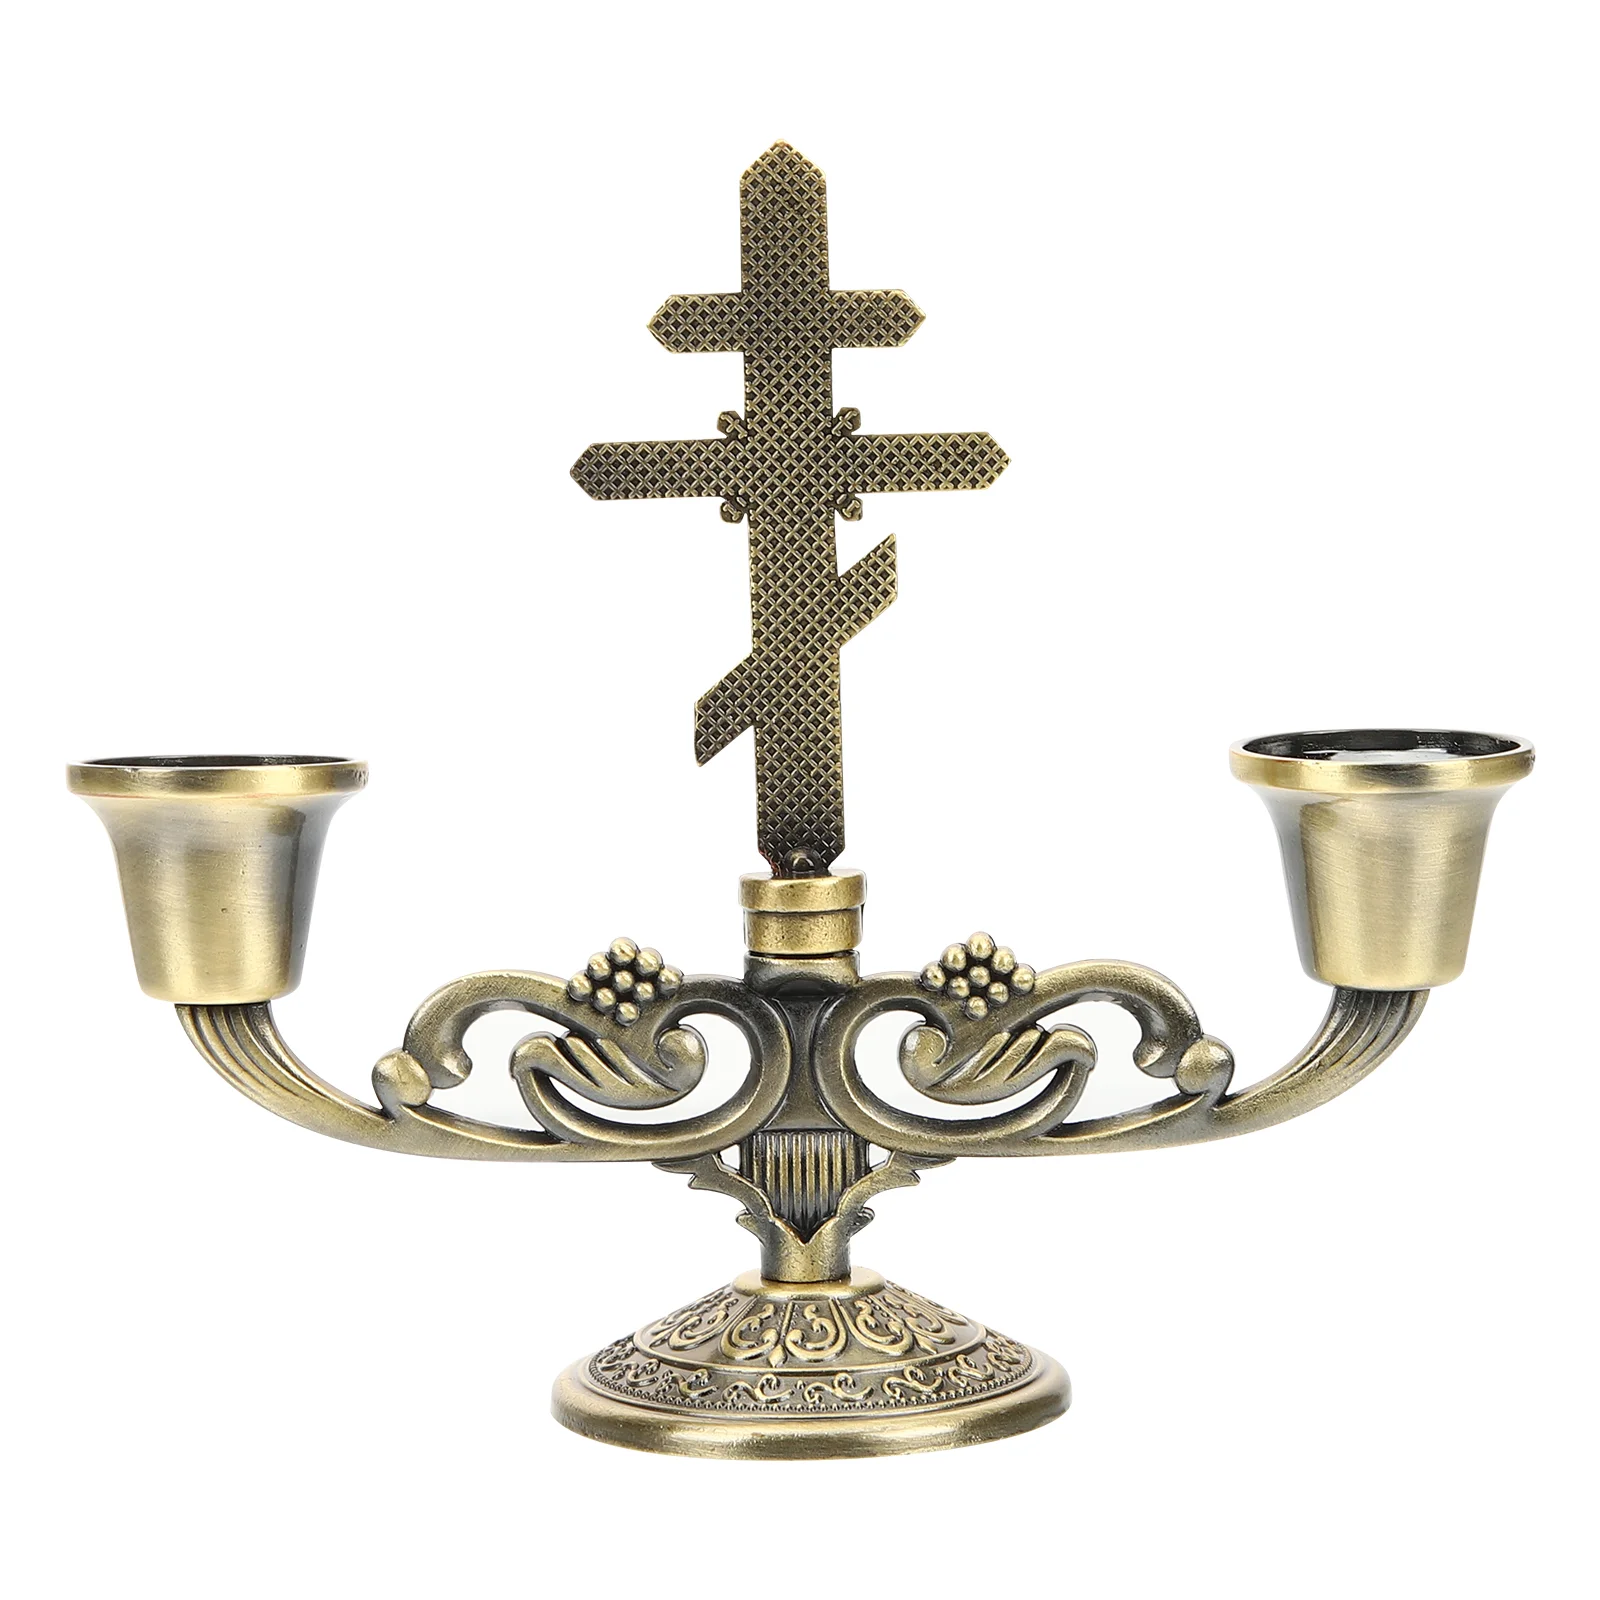 

Candelabra Holder Crucifix Candlestick Style Stand Metal European Cross Branches Stick Holders Arms Church Catholic Retro